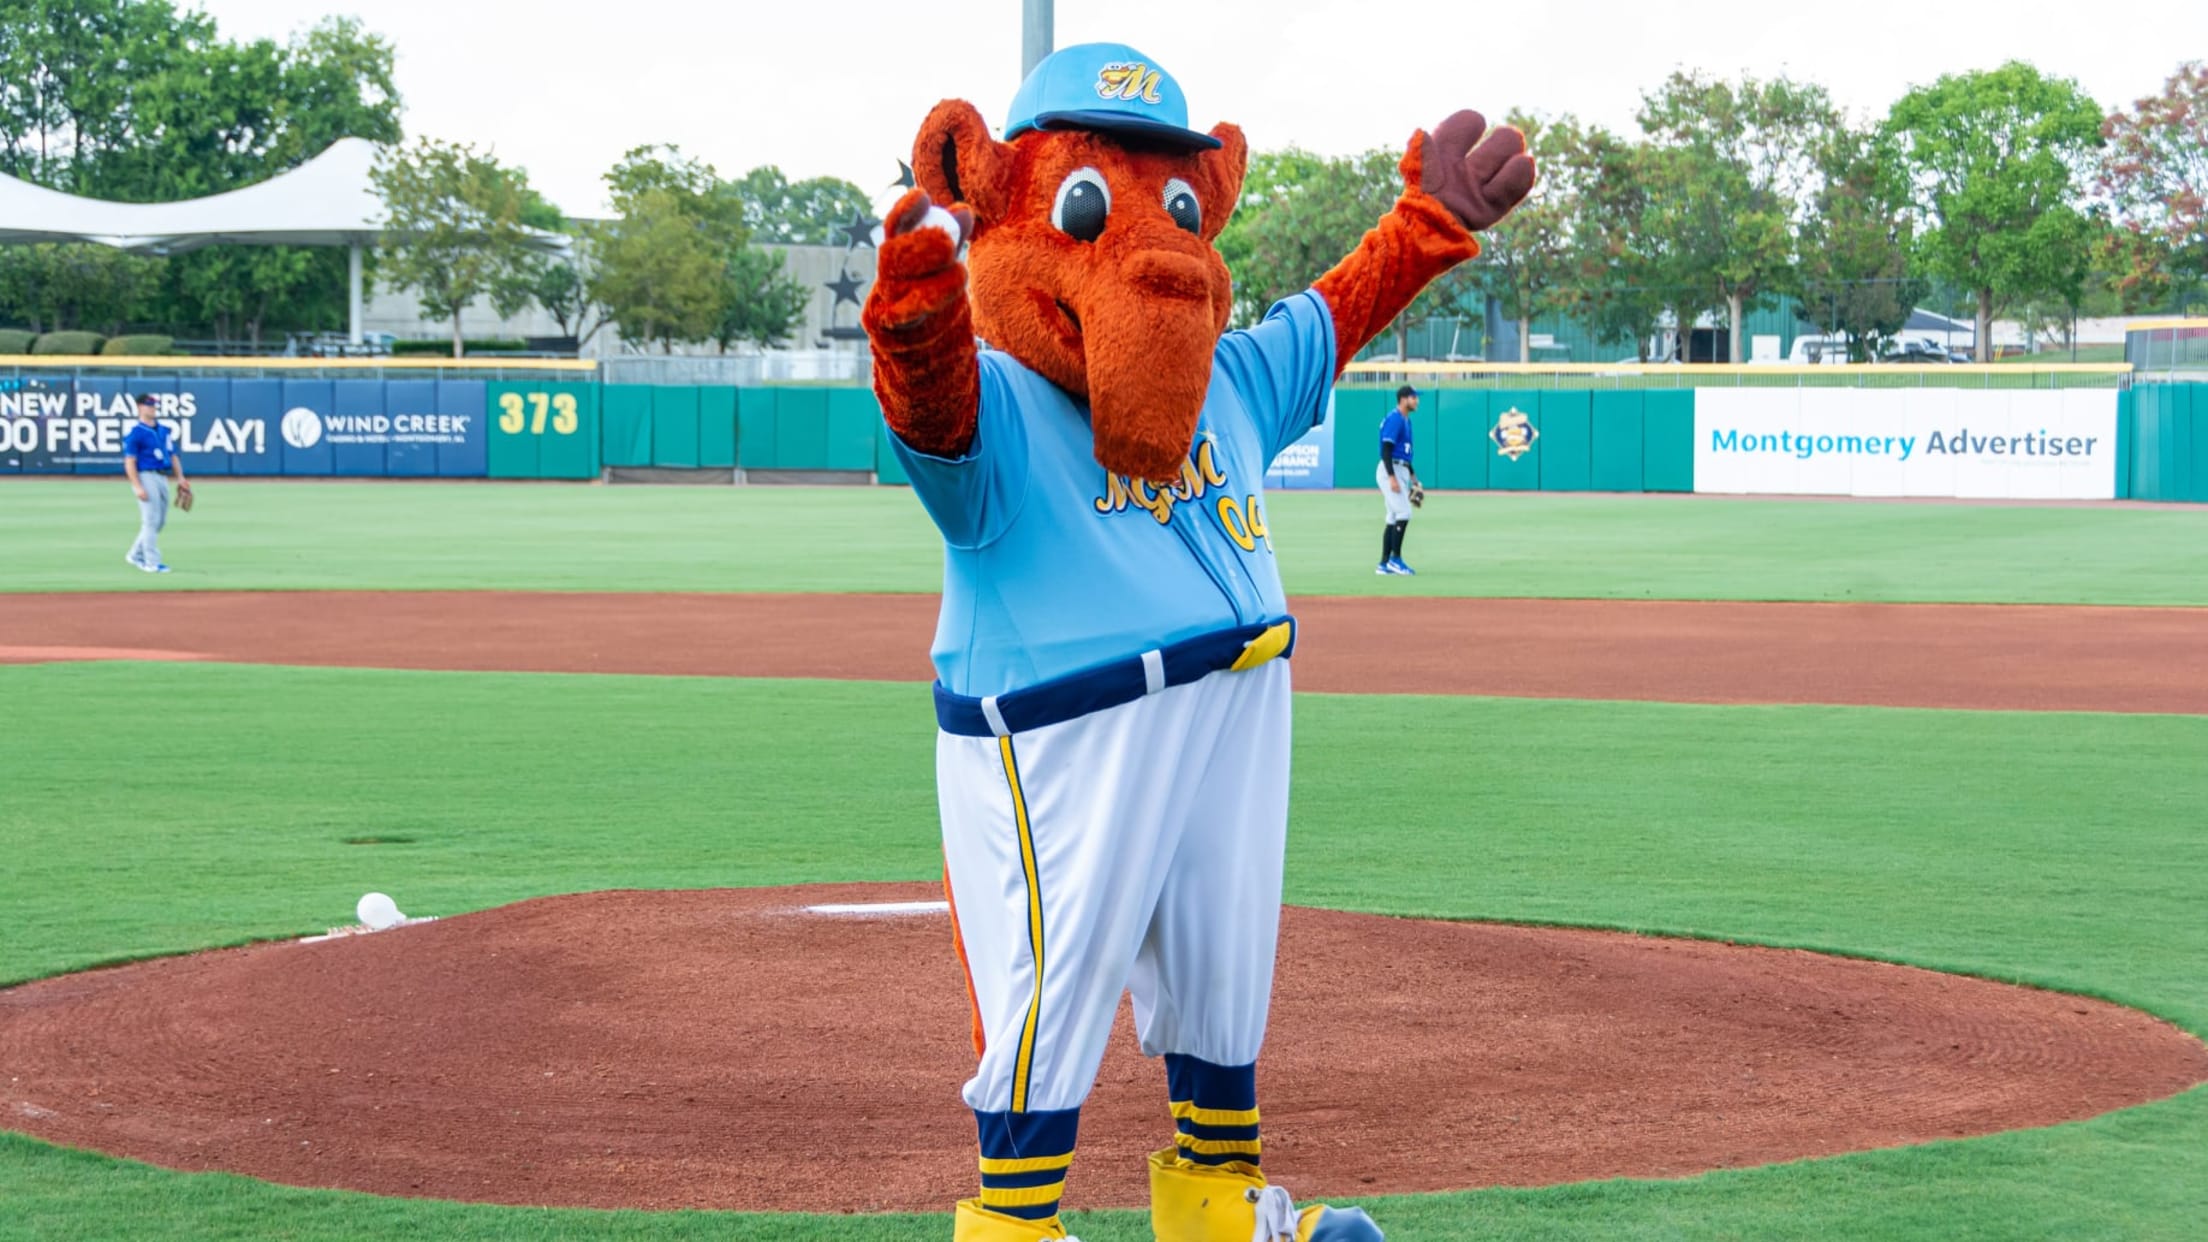 Monty, This is the mascot of the Southern League Minor Leag…